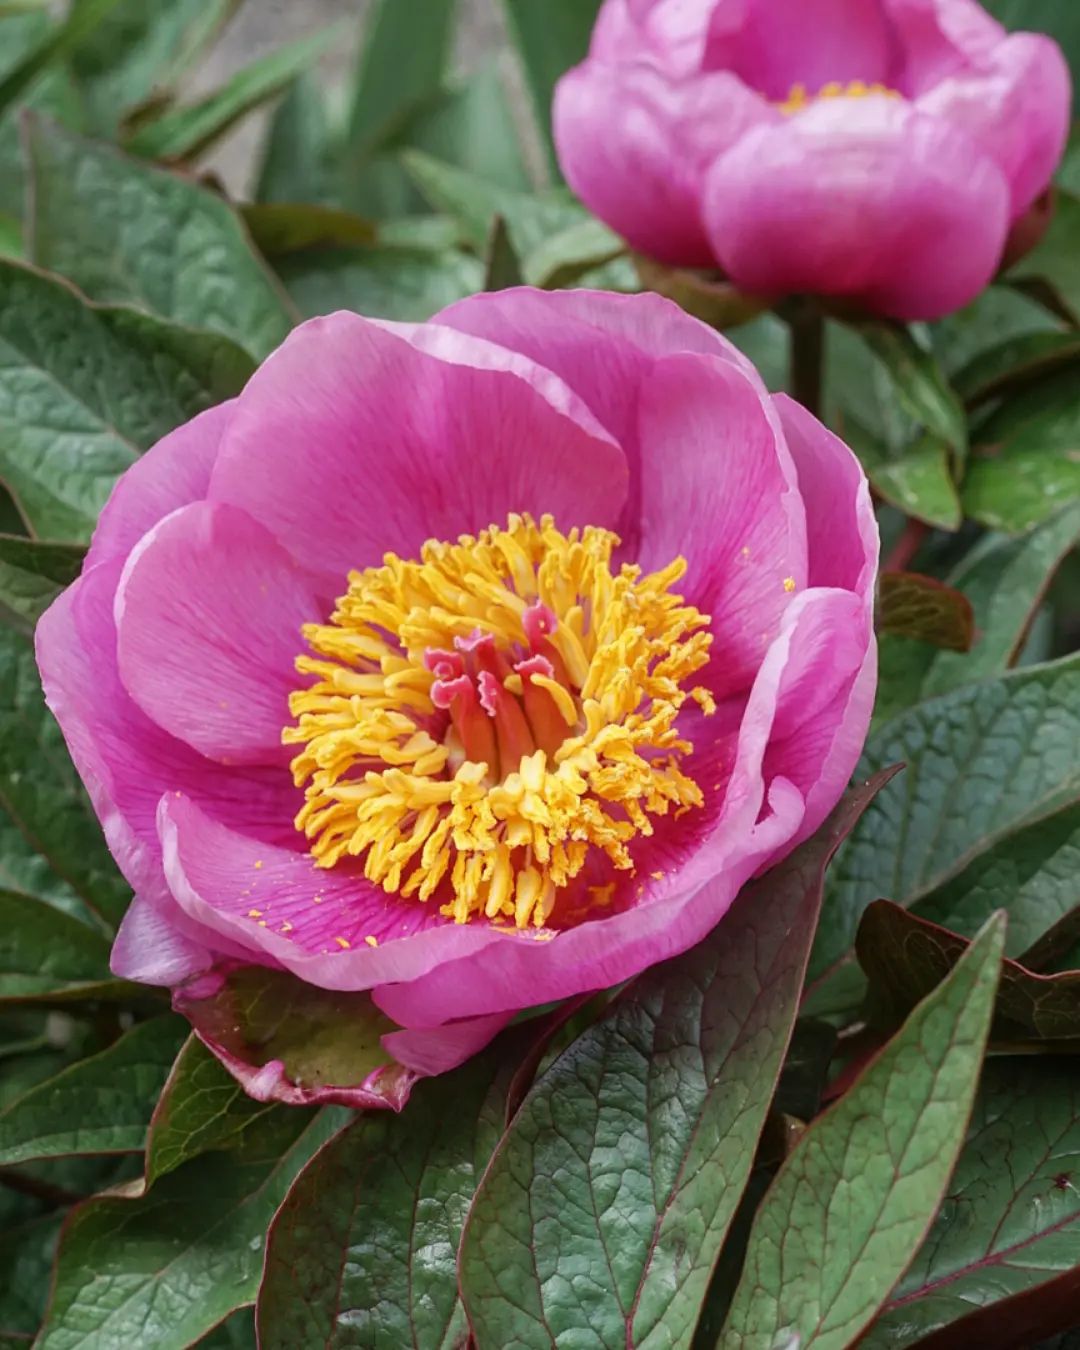 Paeonia Cambessedesii - Cambessedes' Peony
